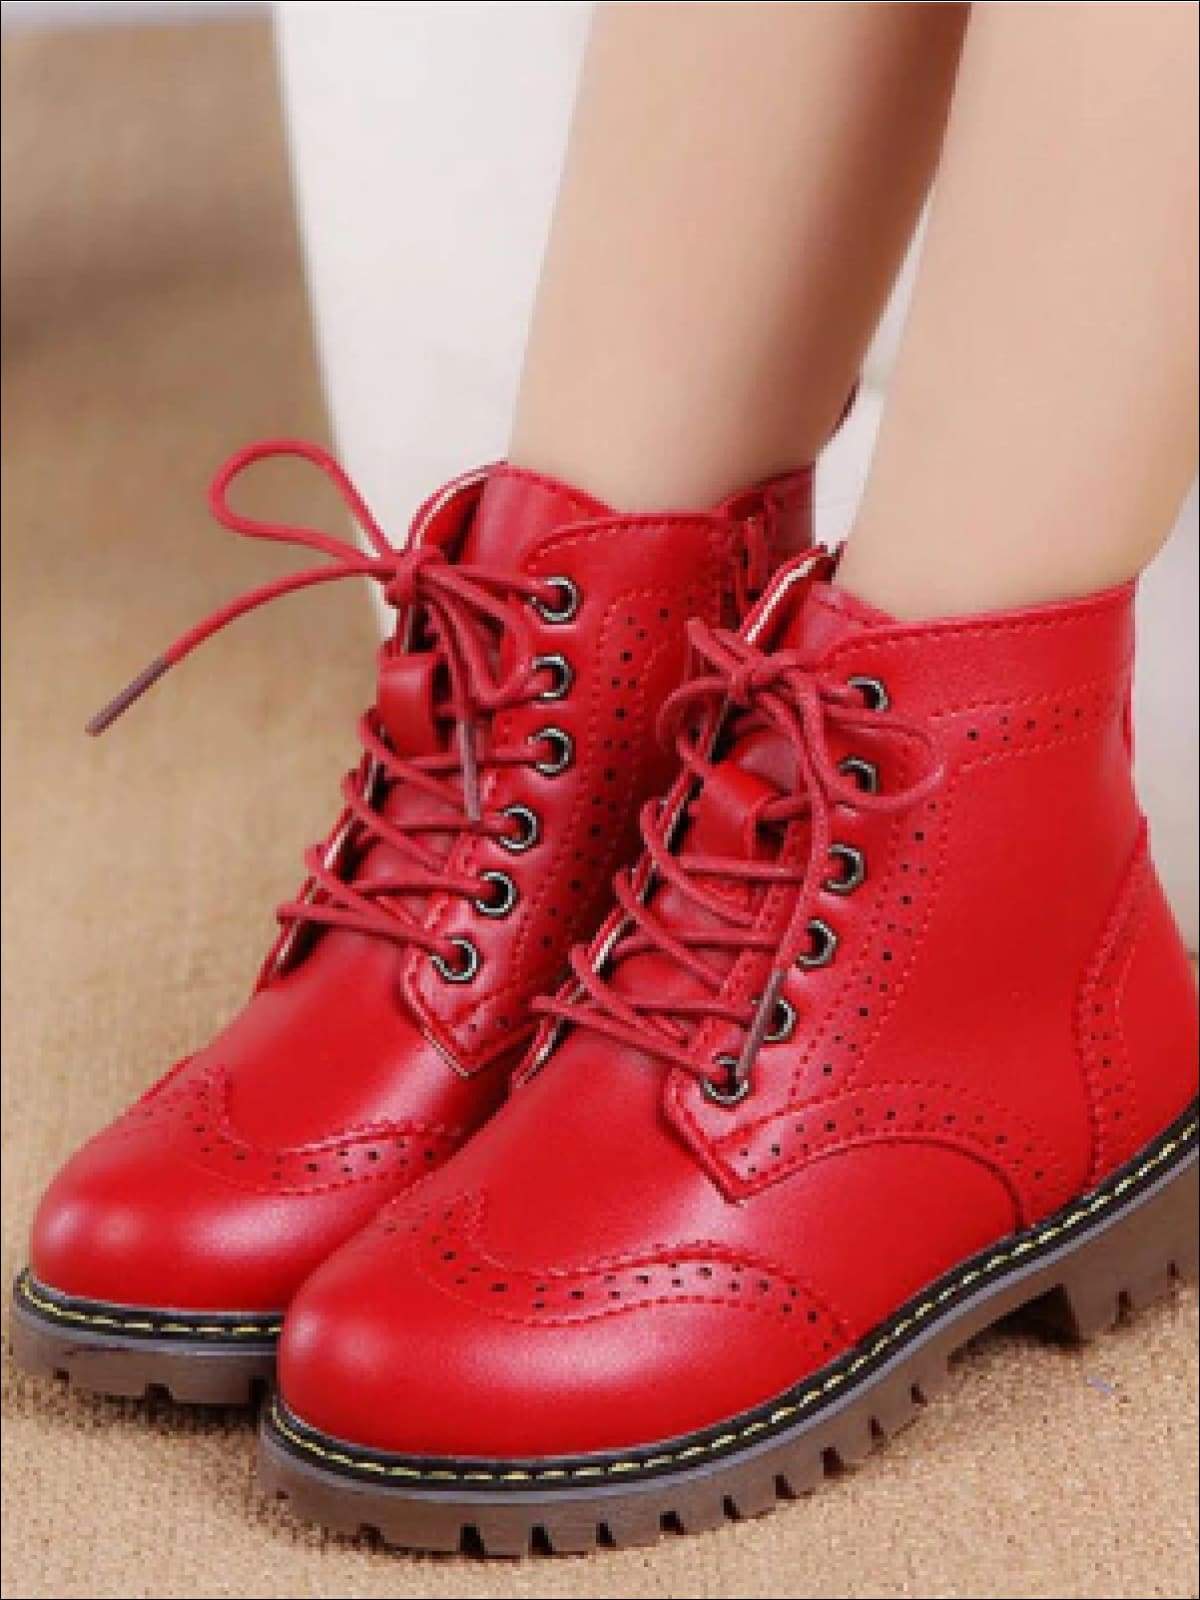 Little Girls Red Boots | Mia Belle Girls Shoes & Accessories